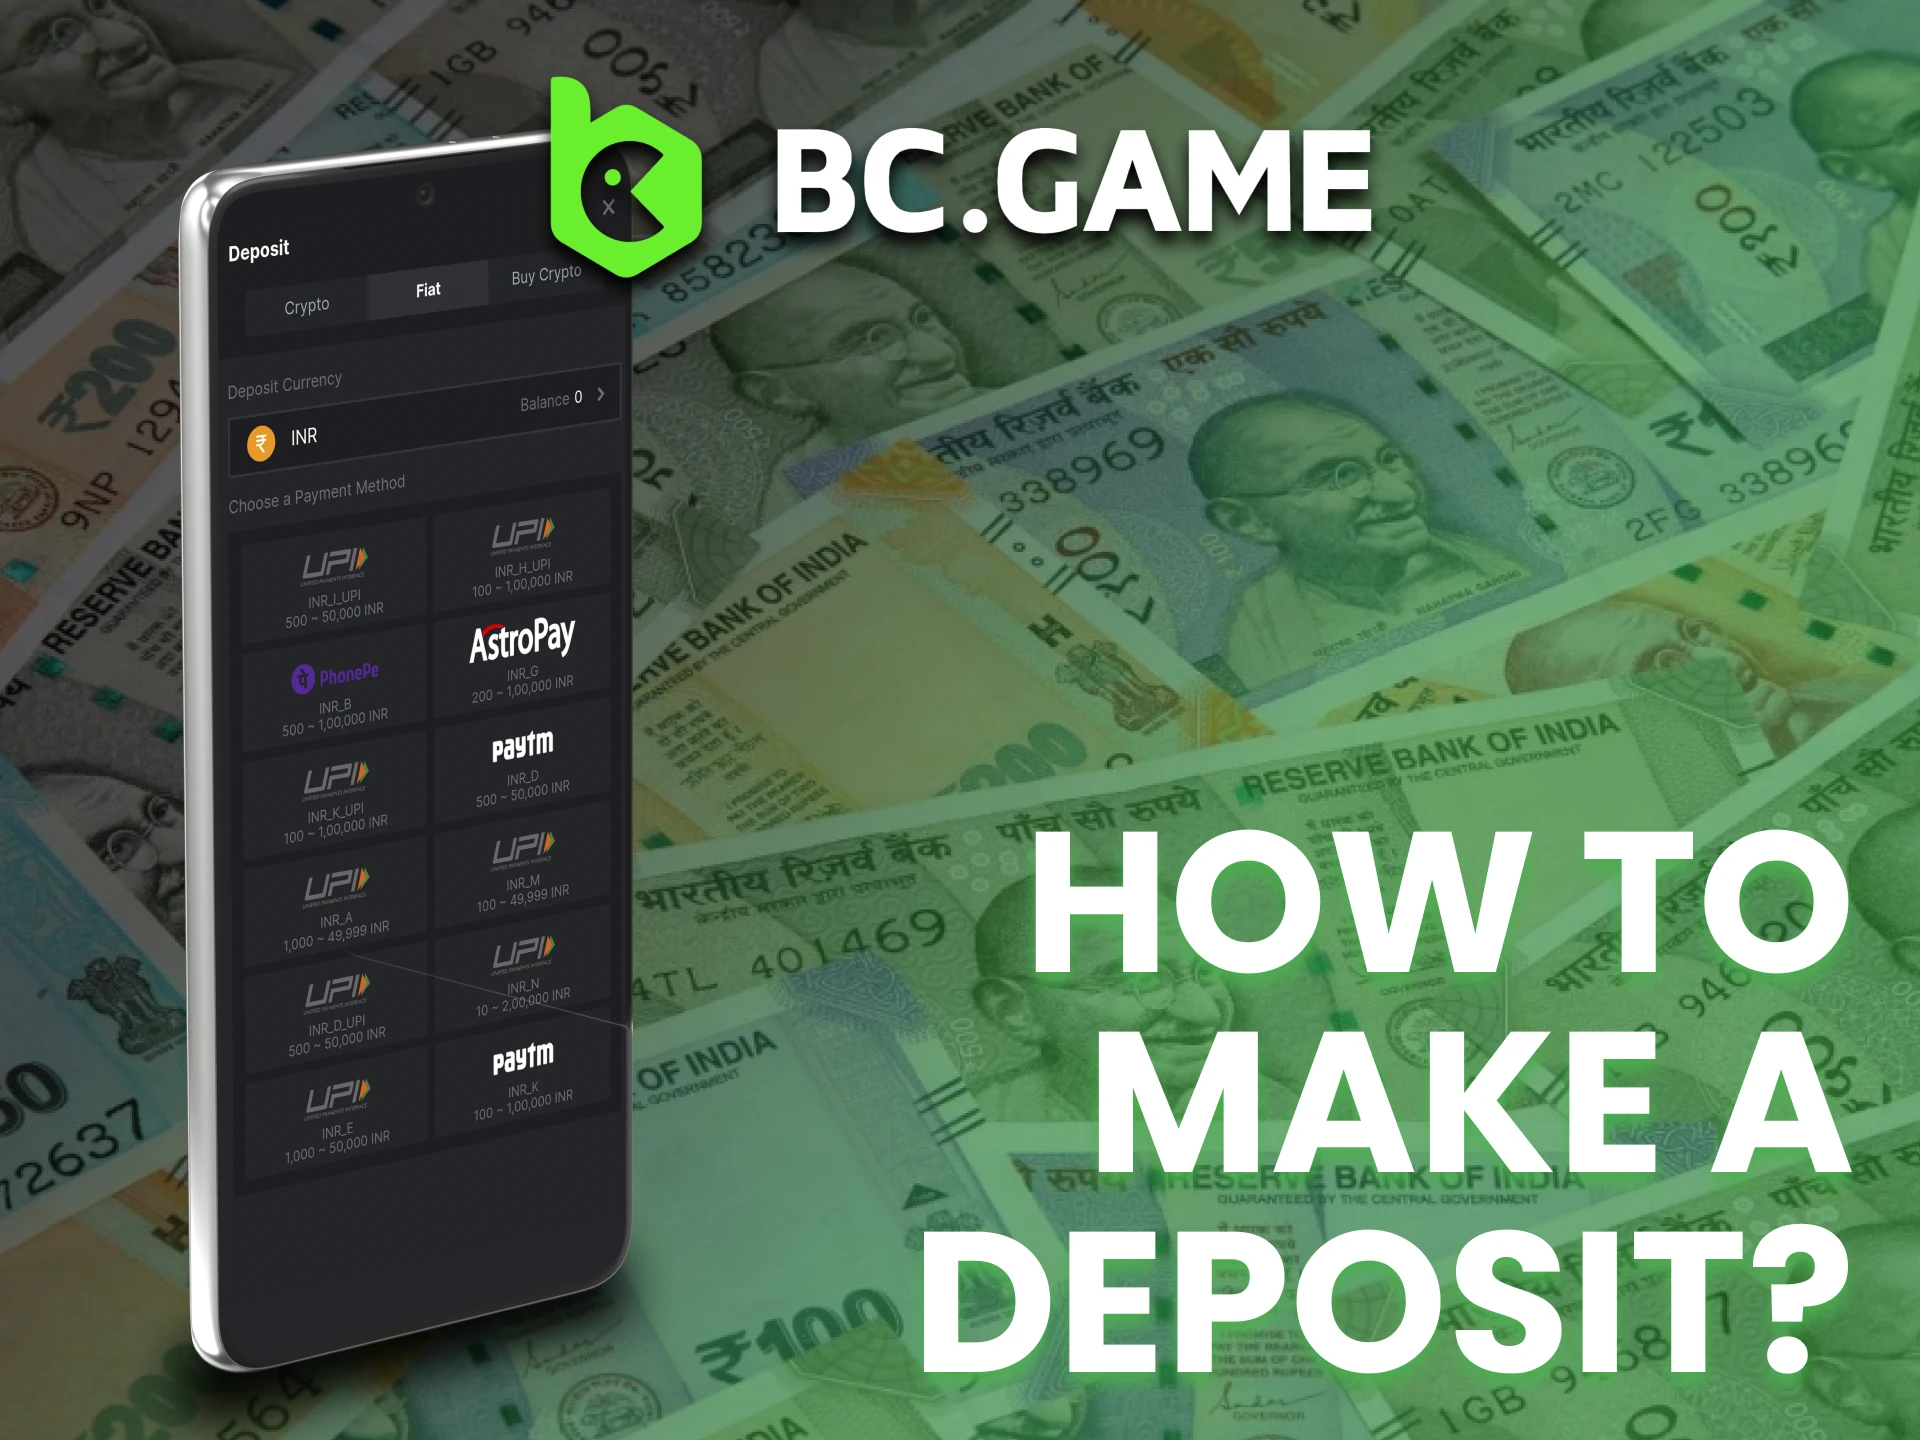 Make new deposit by clicking on deposit button in BC Game app.